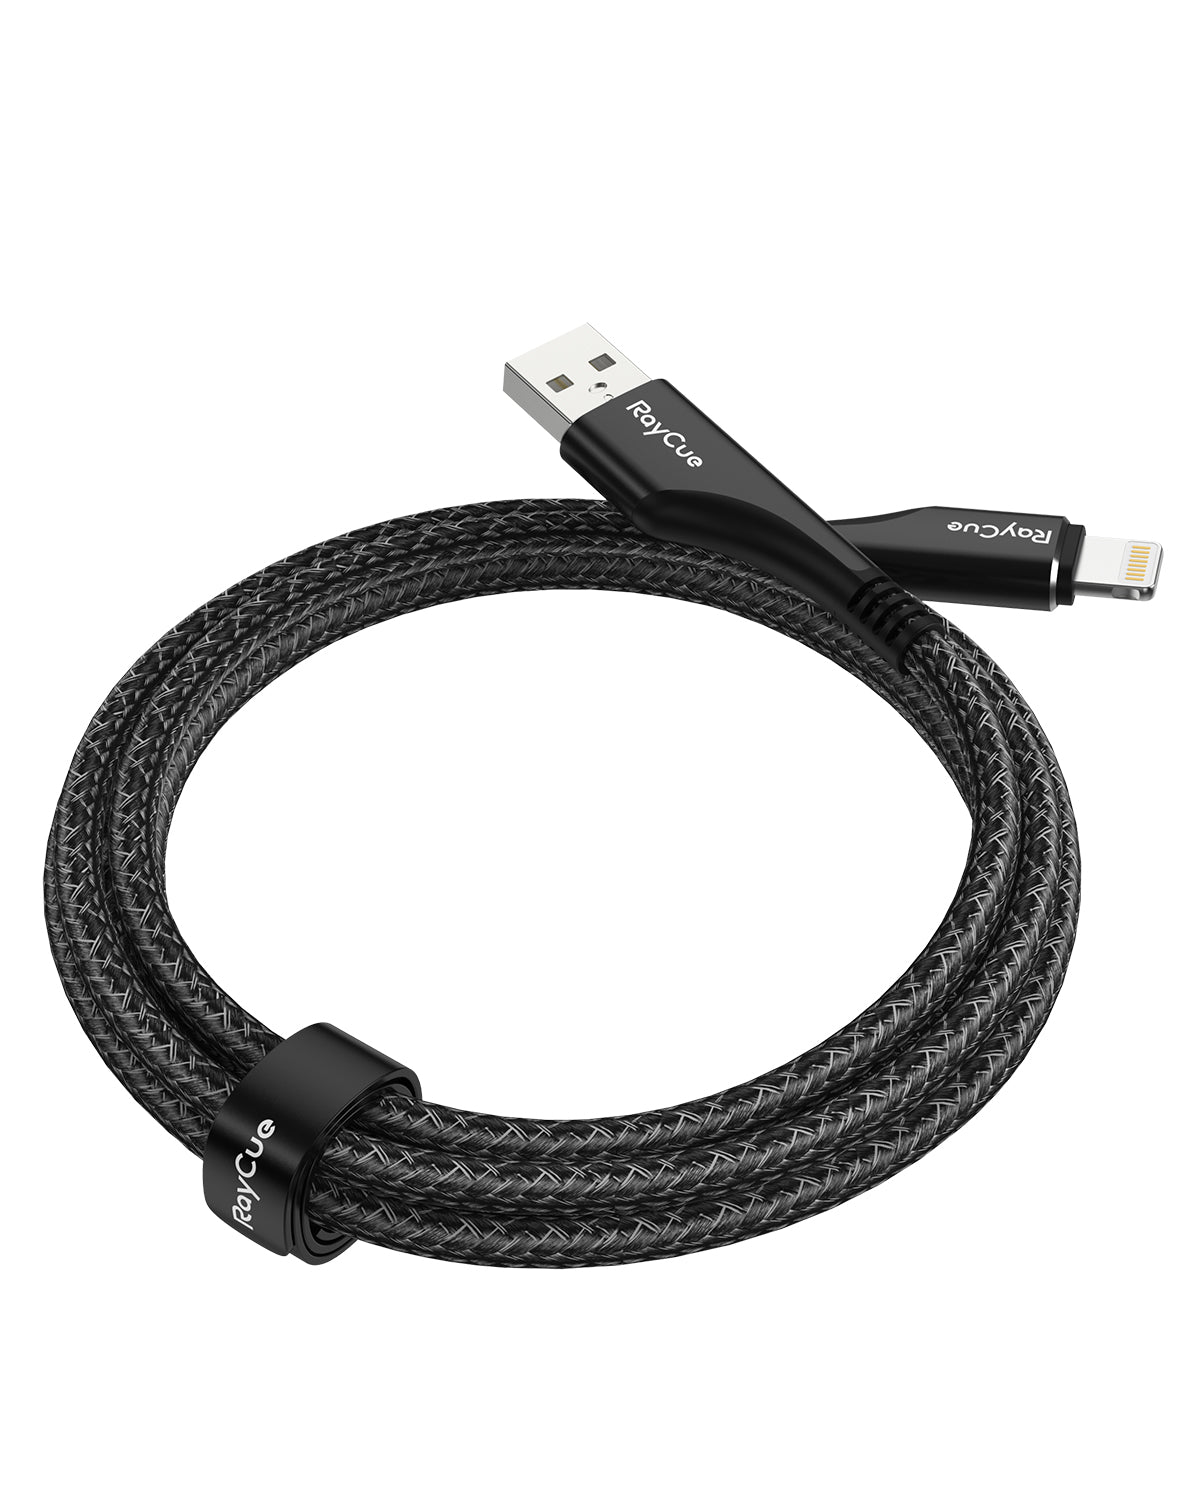 [MFI Certified] RayCue BlitzLink Blade Series 1.2M USB-A to Lightning Cable